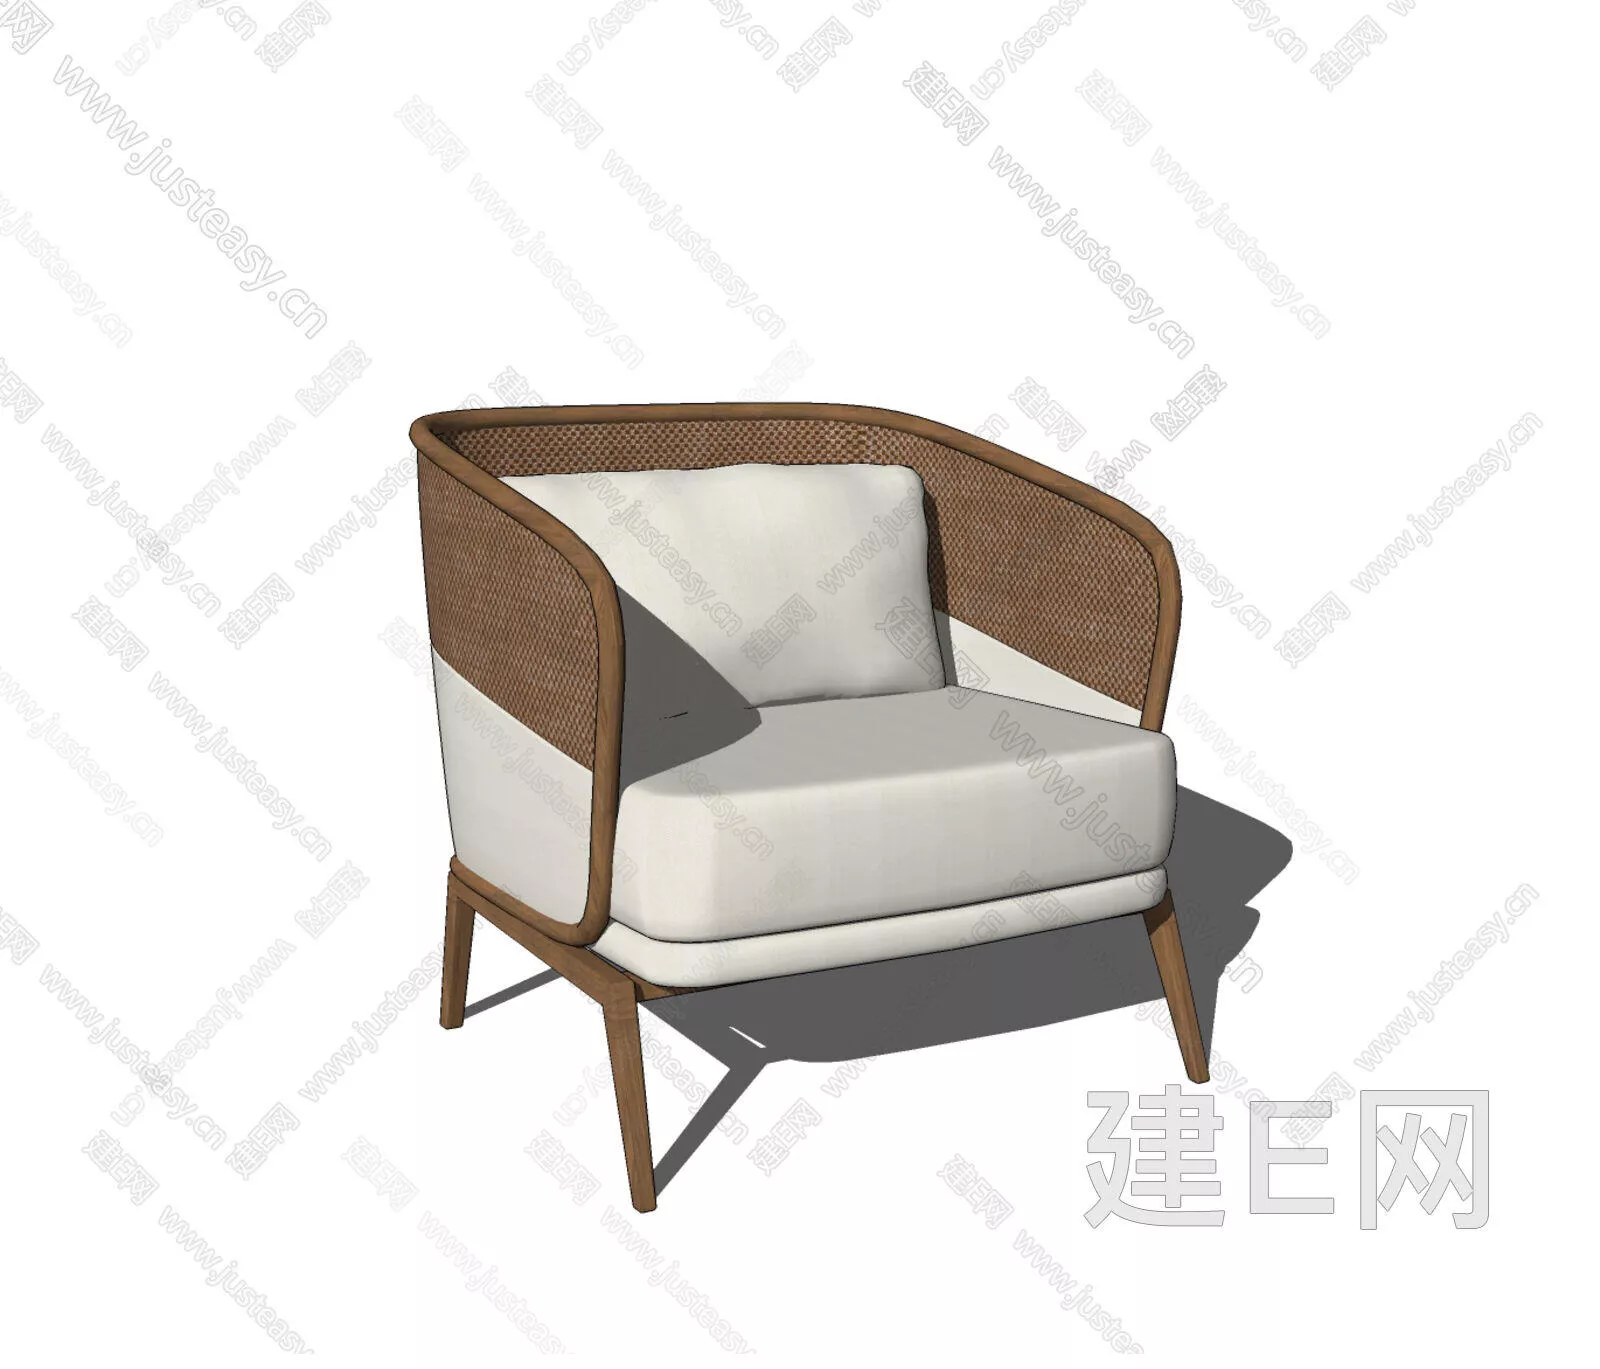 CHINESE LOUNGLE CHAIR - SKETCHUP 3D MODEL - ENSCAPE - 113394952